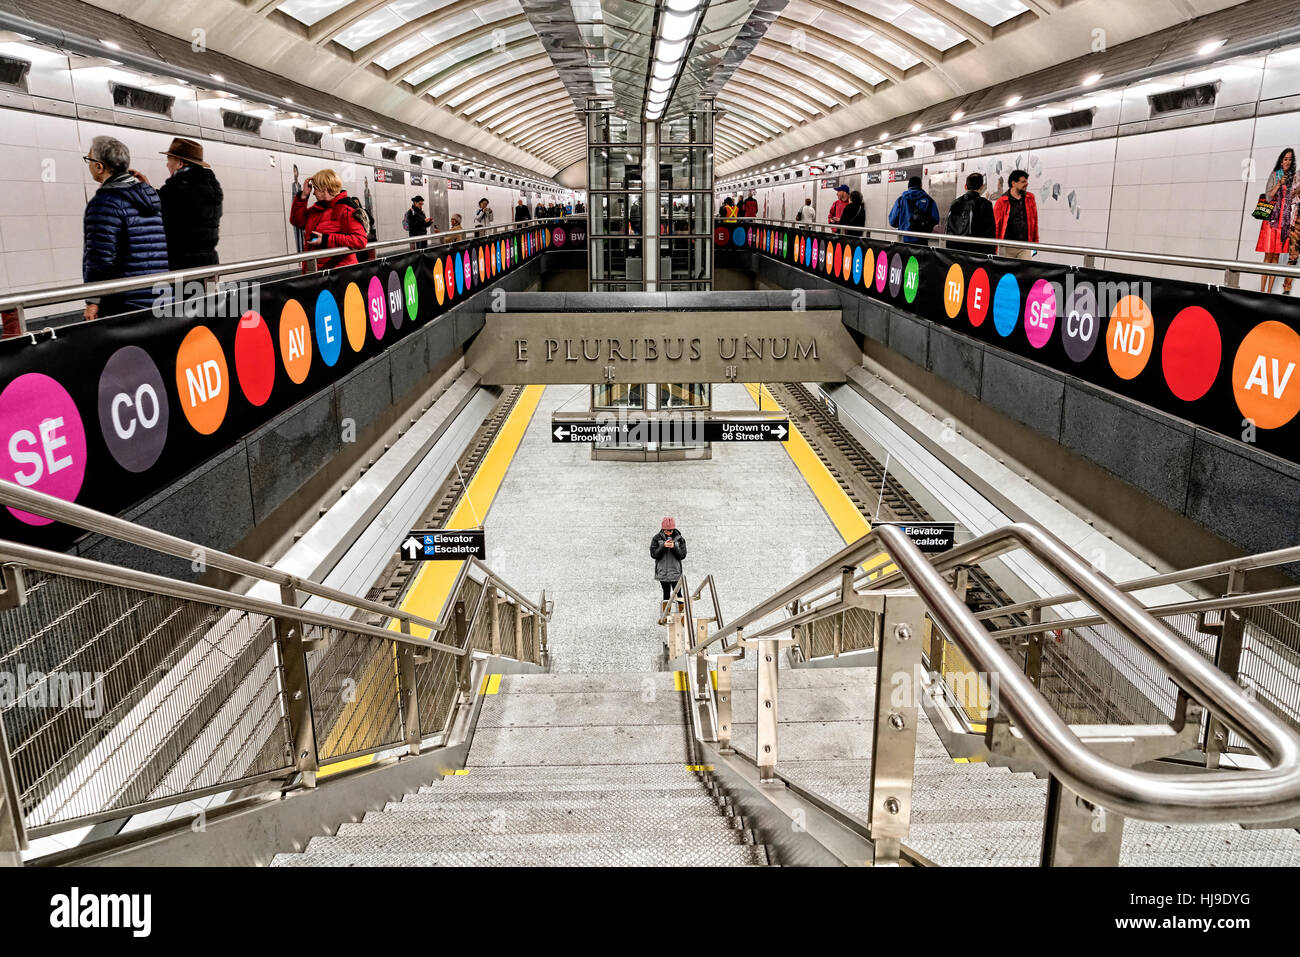 Manhattan, New York City, Second Avenue Subway Line, 72nd Street Station.  Looking Down the Stairwell from the Mid Level to the Train Platform.  Peopl Stock Photo